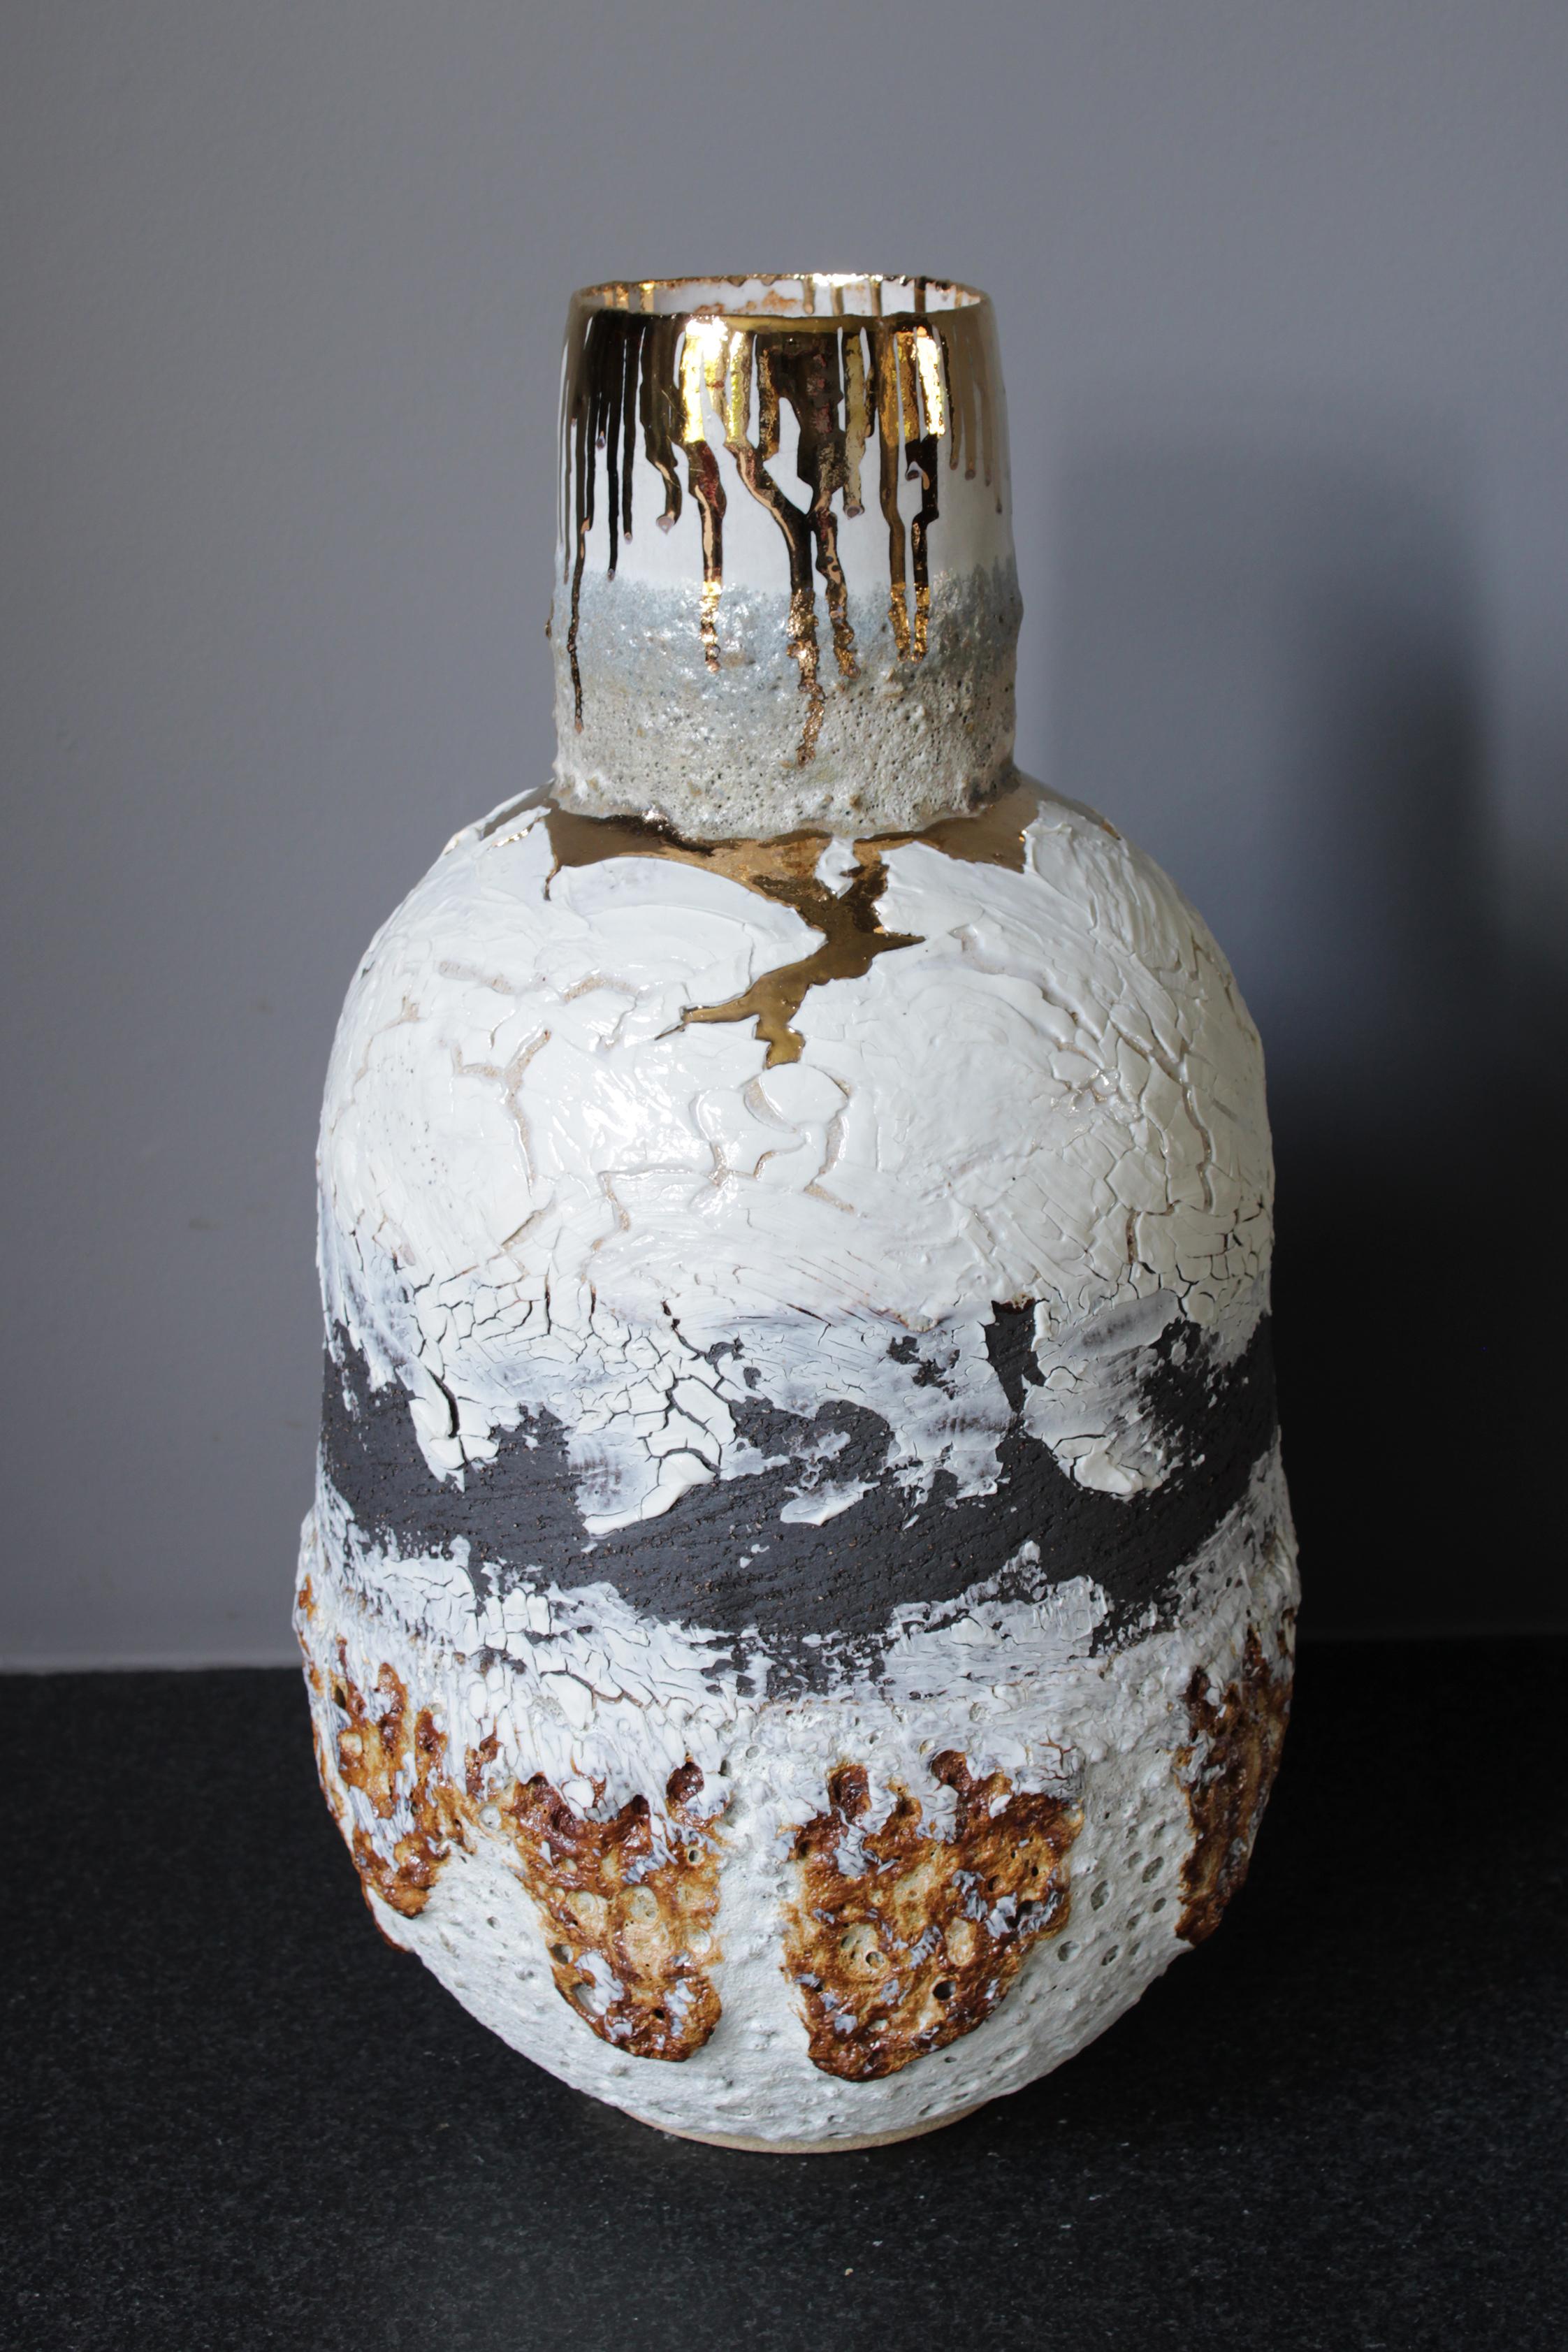 Tall large bottle shaped white and black stoneware clay and porcelain vessel with heavy volcanic textured glaze and lava stone.
There is an option to add gold lustre or black feathered glaze to the piece.

The work is hand built using a